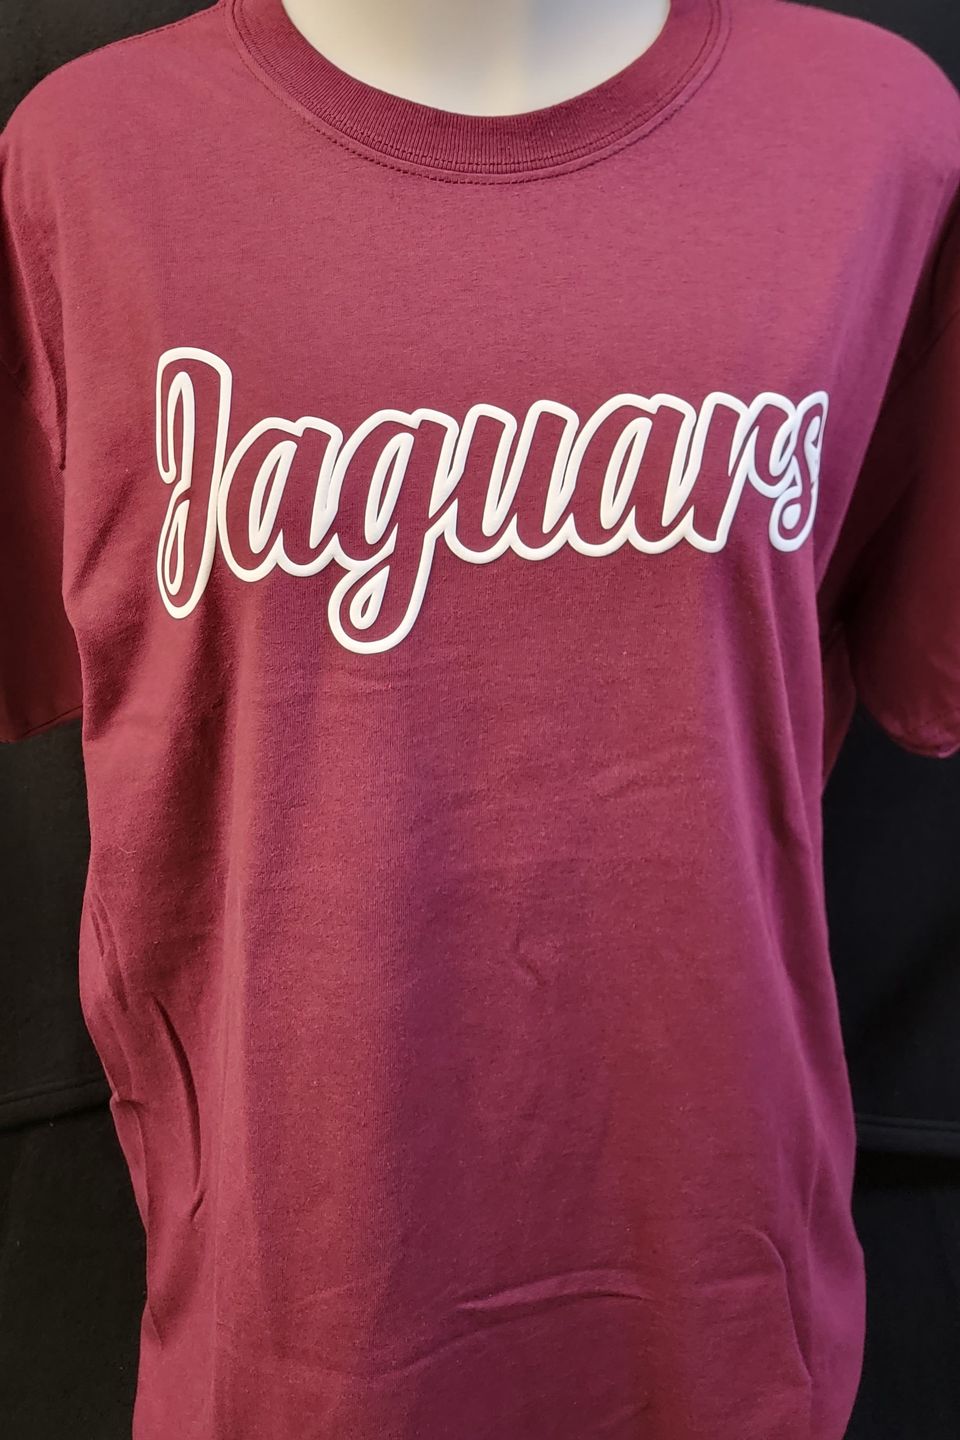 Direct to Film (DTF) example by SaRi's Creations - Jaguars on burgundy shirt. 